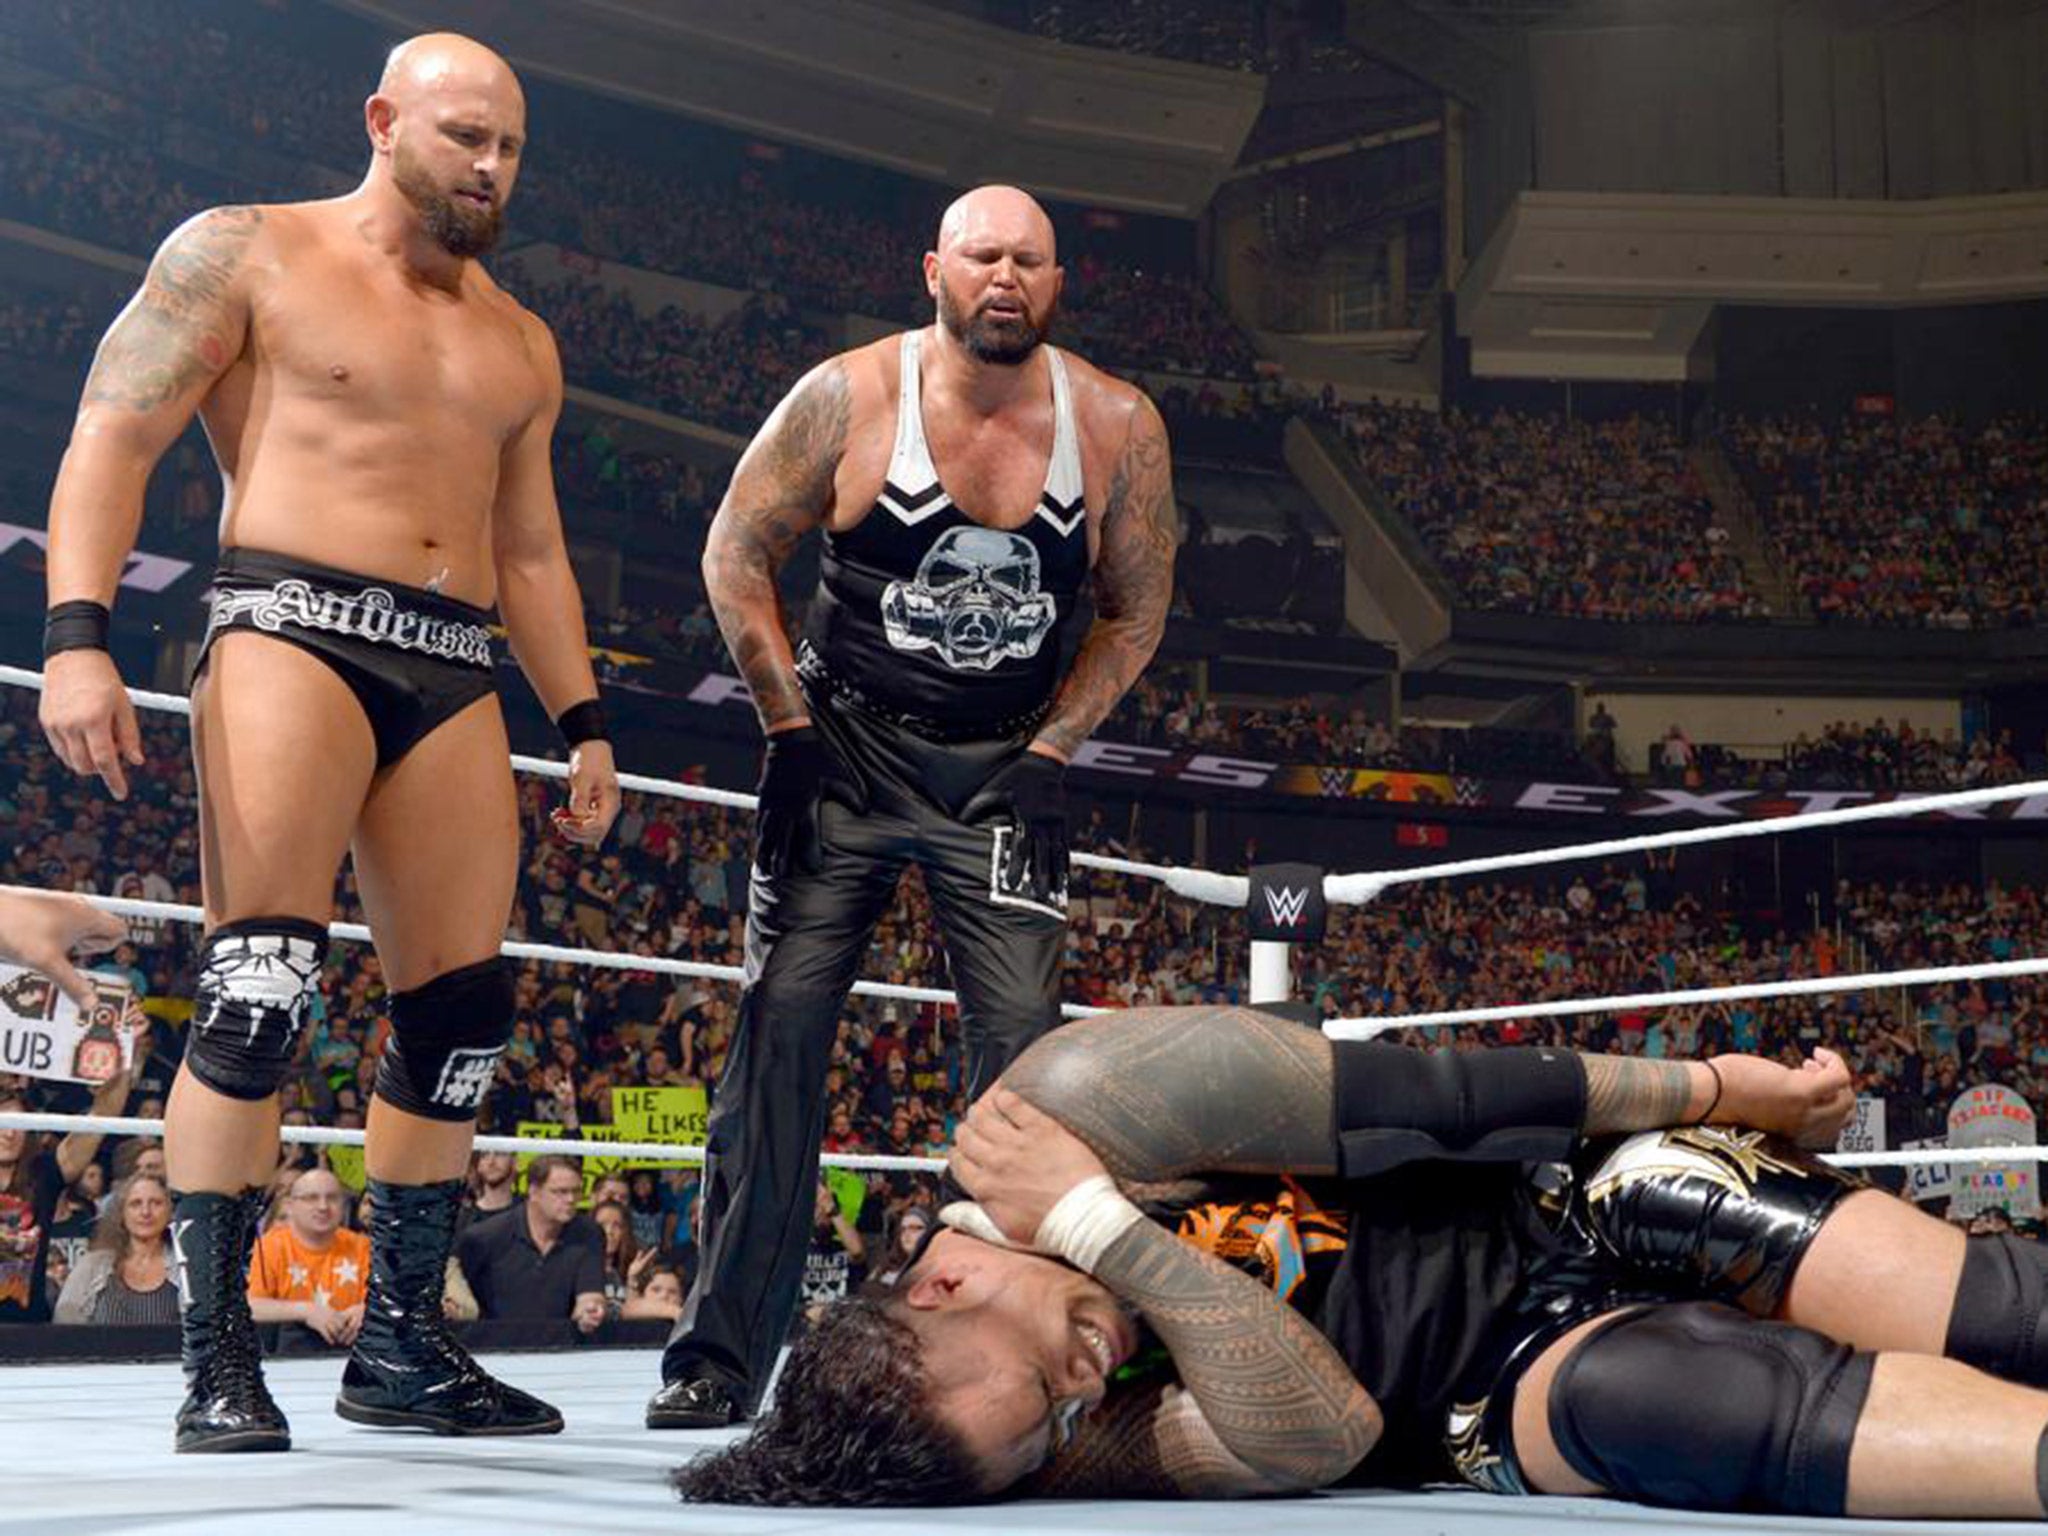 Karl Anderson and Luke Gallows stand tall over Jimmy Uso